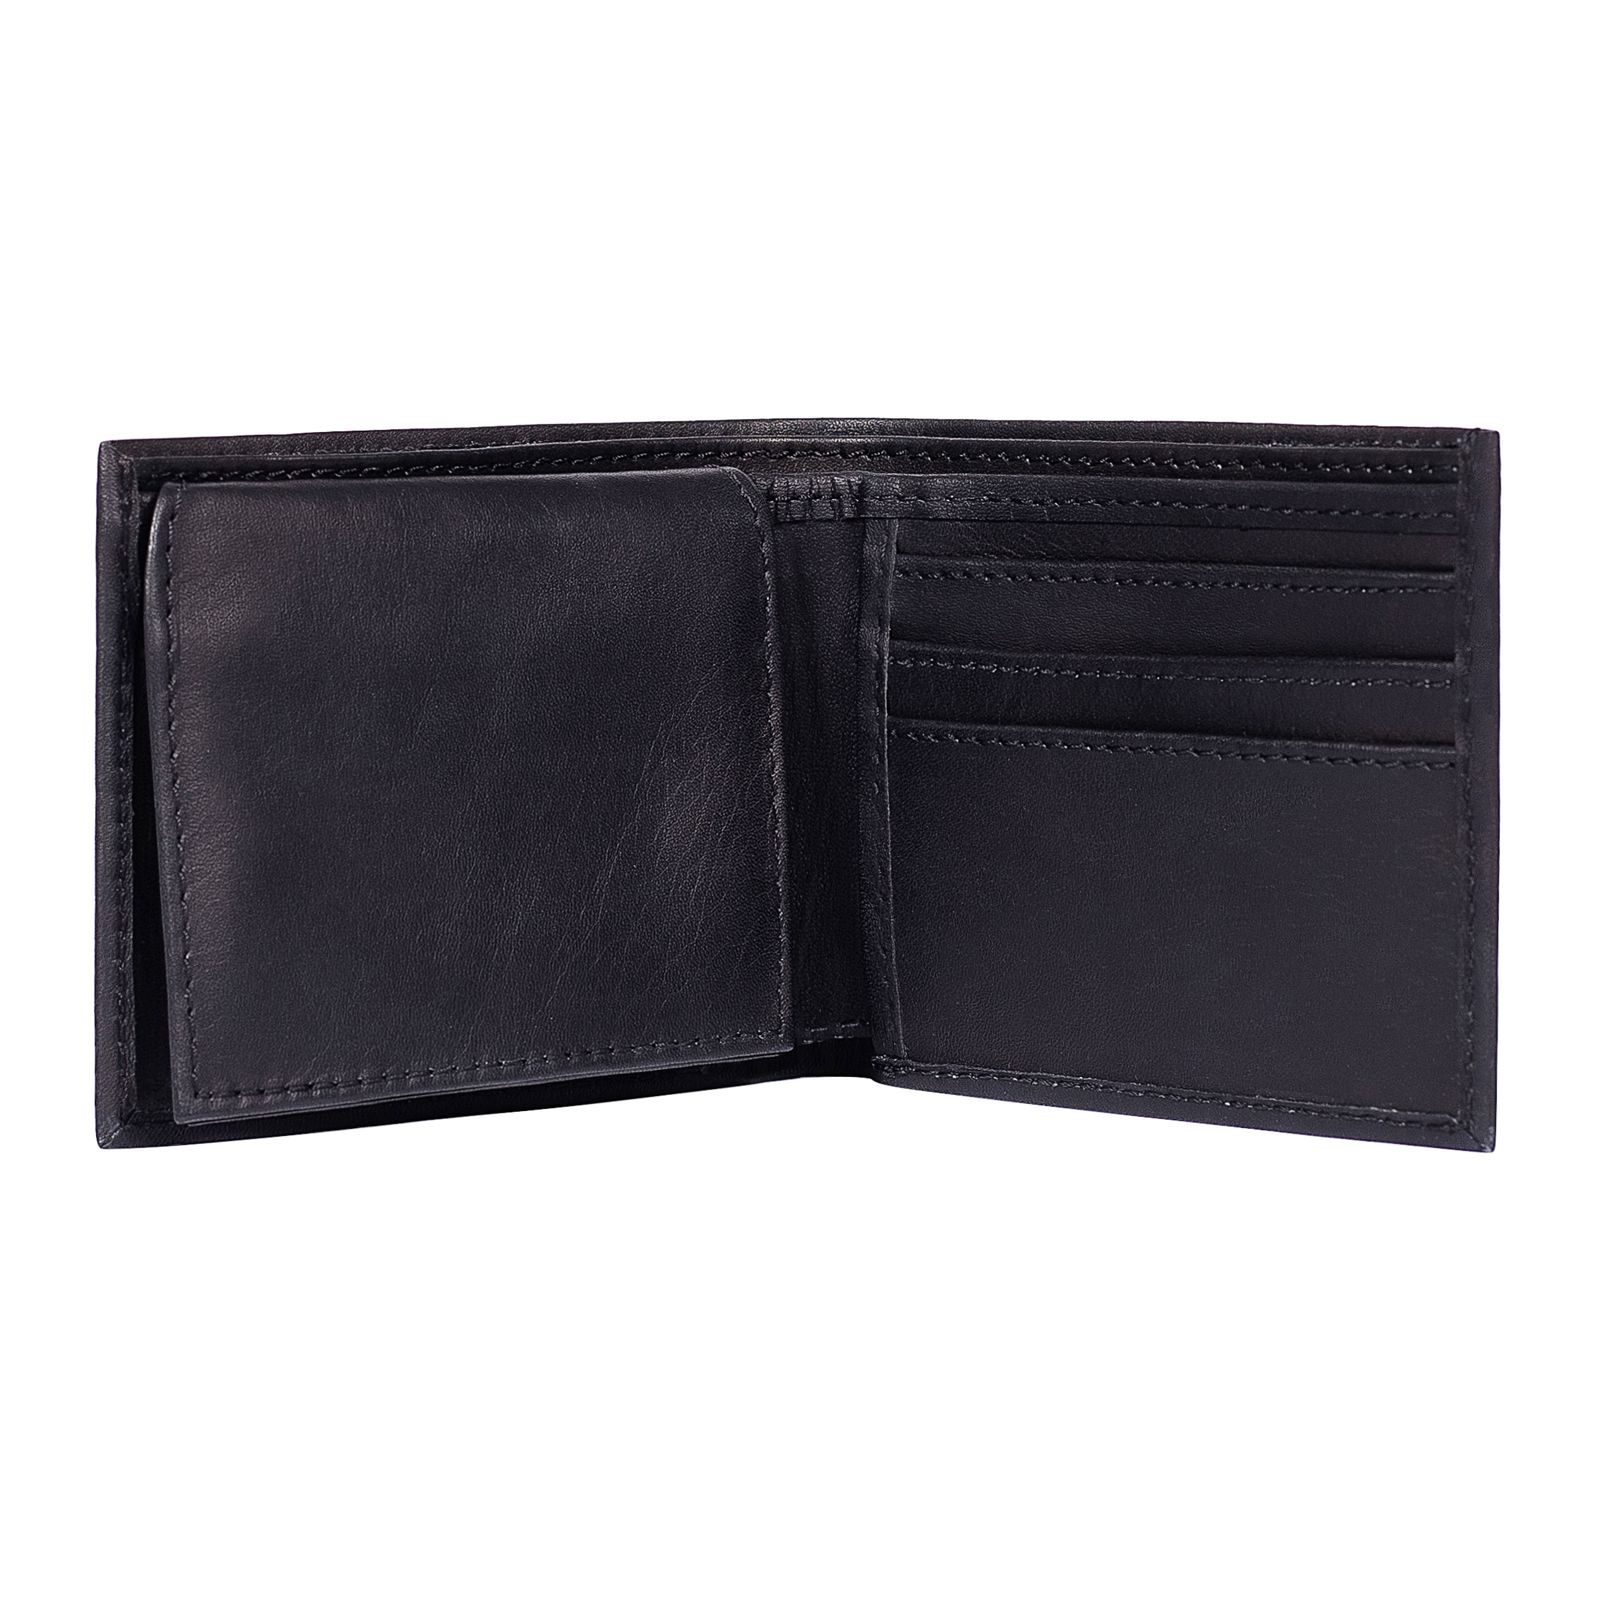 MENS Bifold Wallet 1 Center ID Flap Gift Box Included Premium Cowhide Leather 